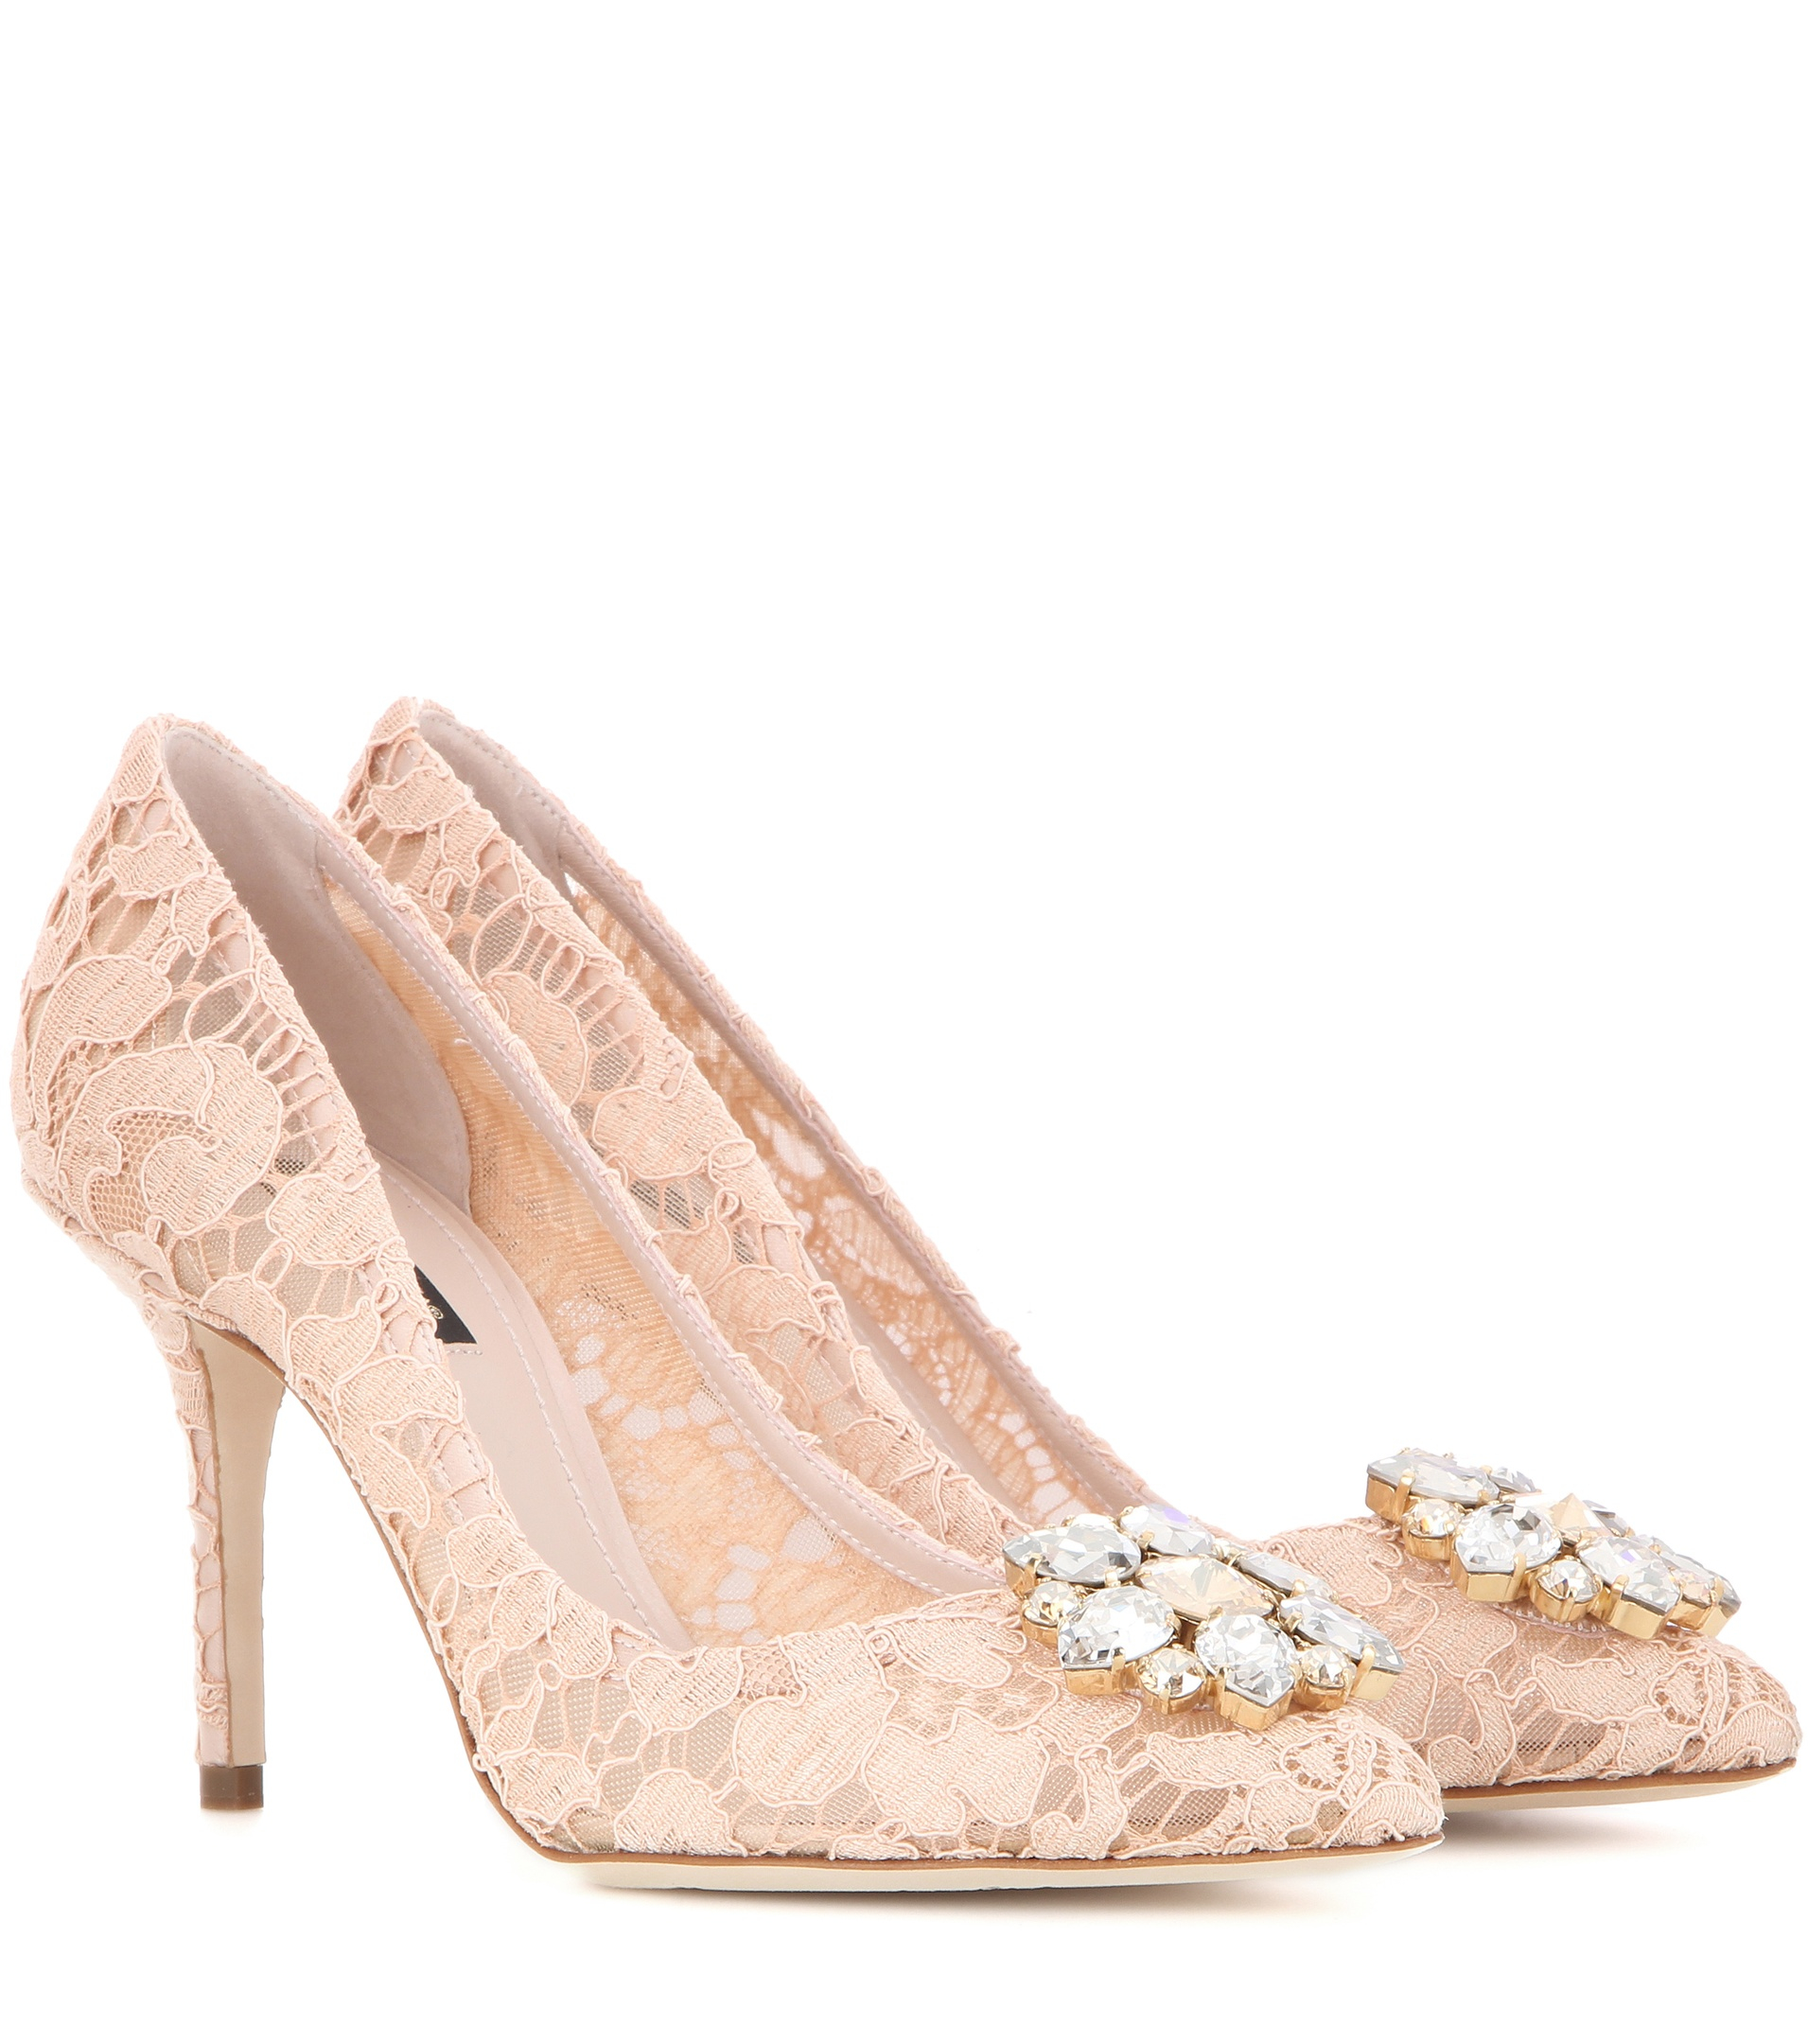 Dolce & gabbana Bellucci Embellished Lace Pumps in Pink | Lyst